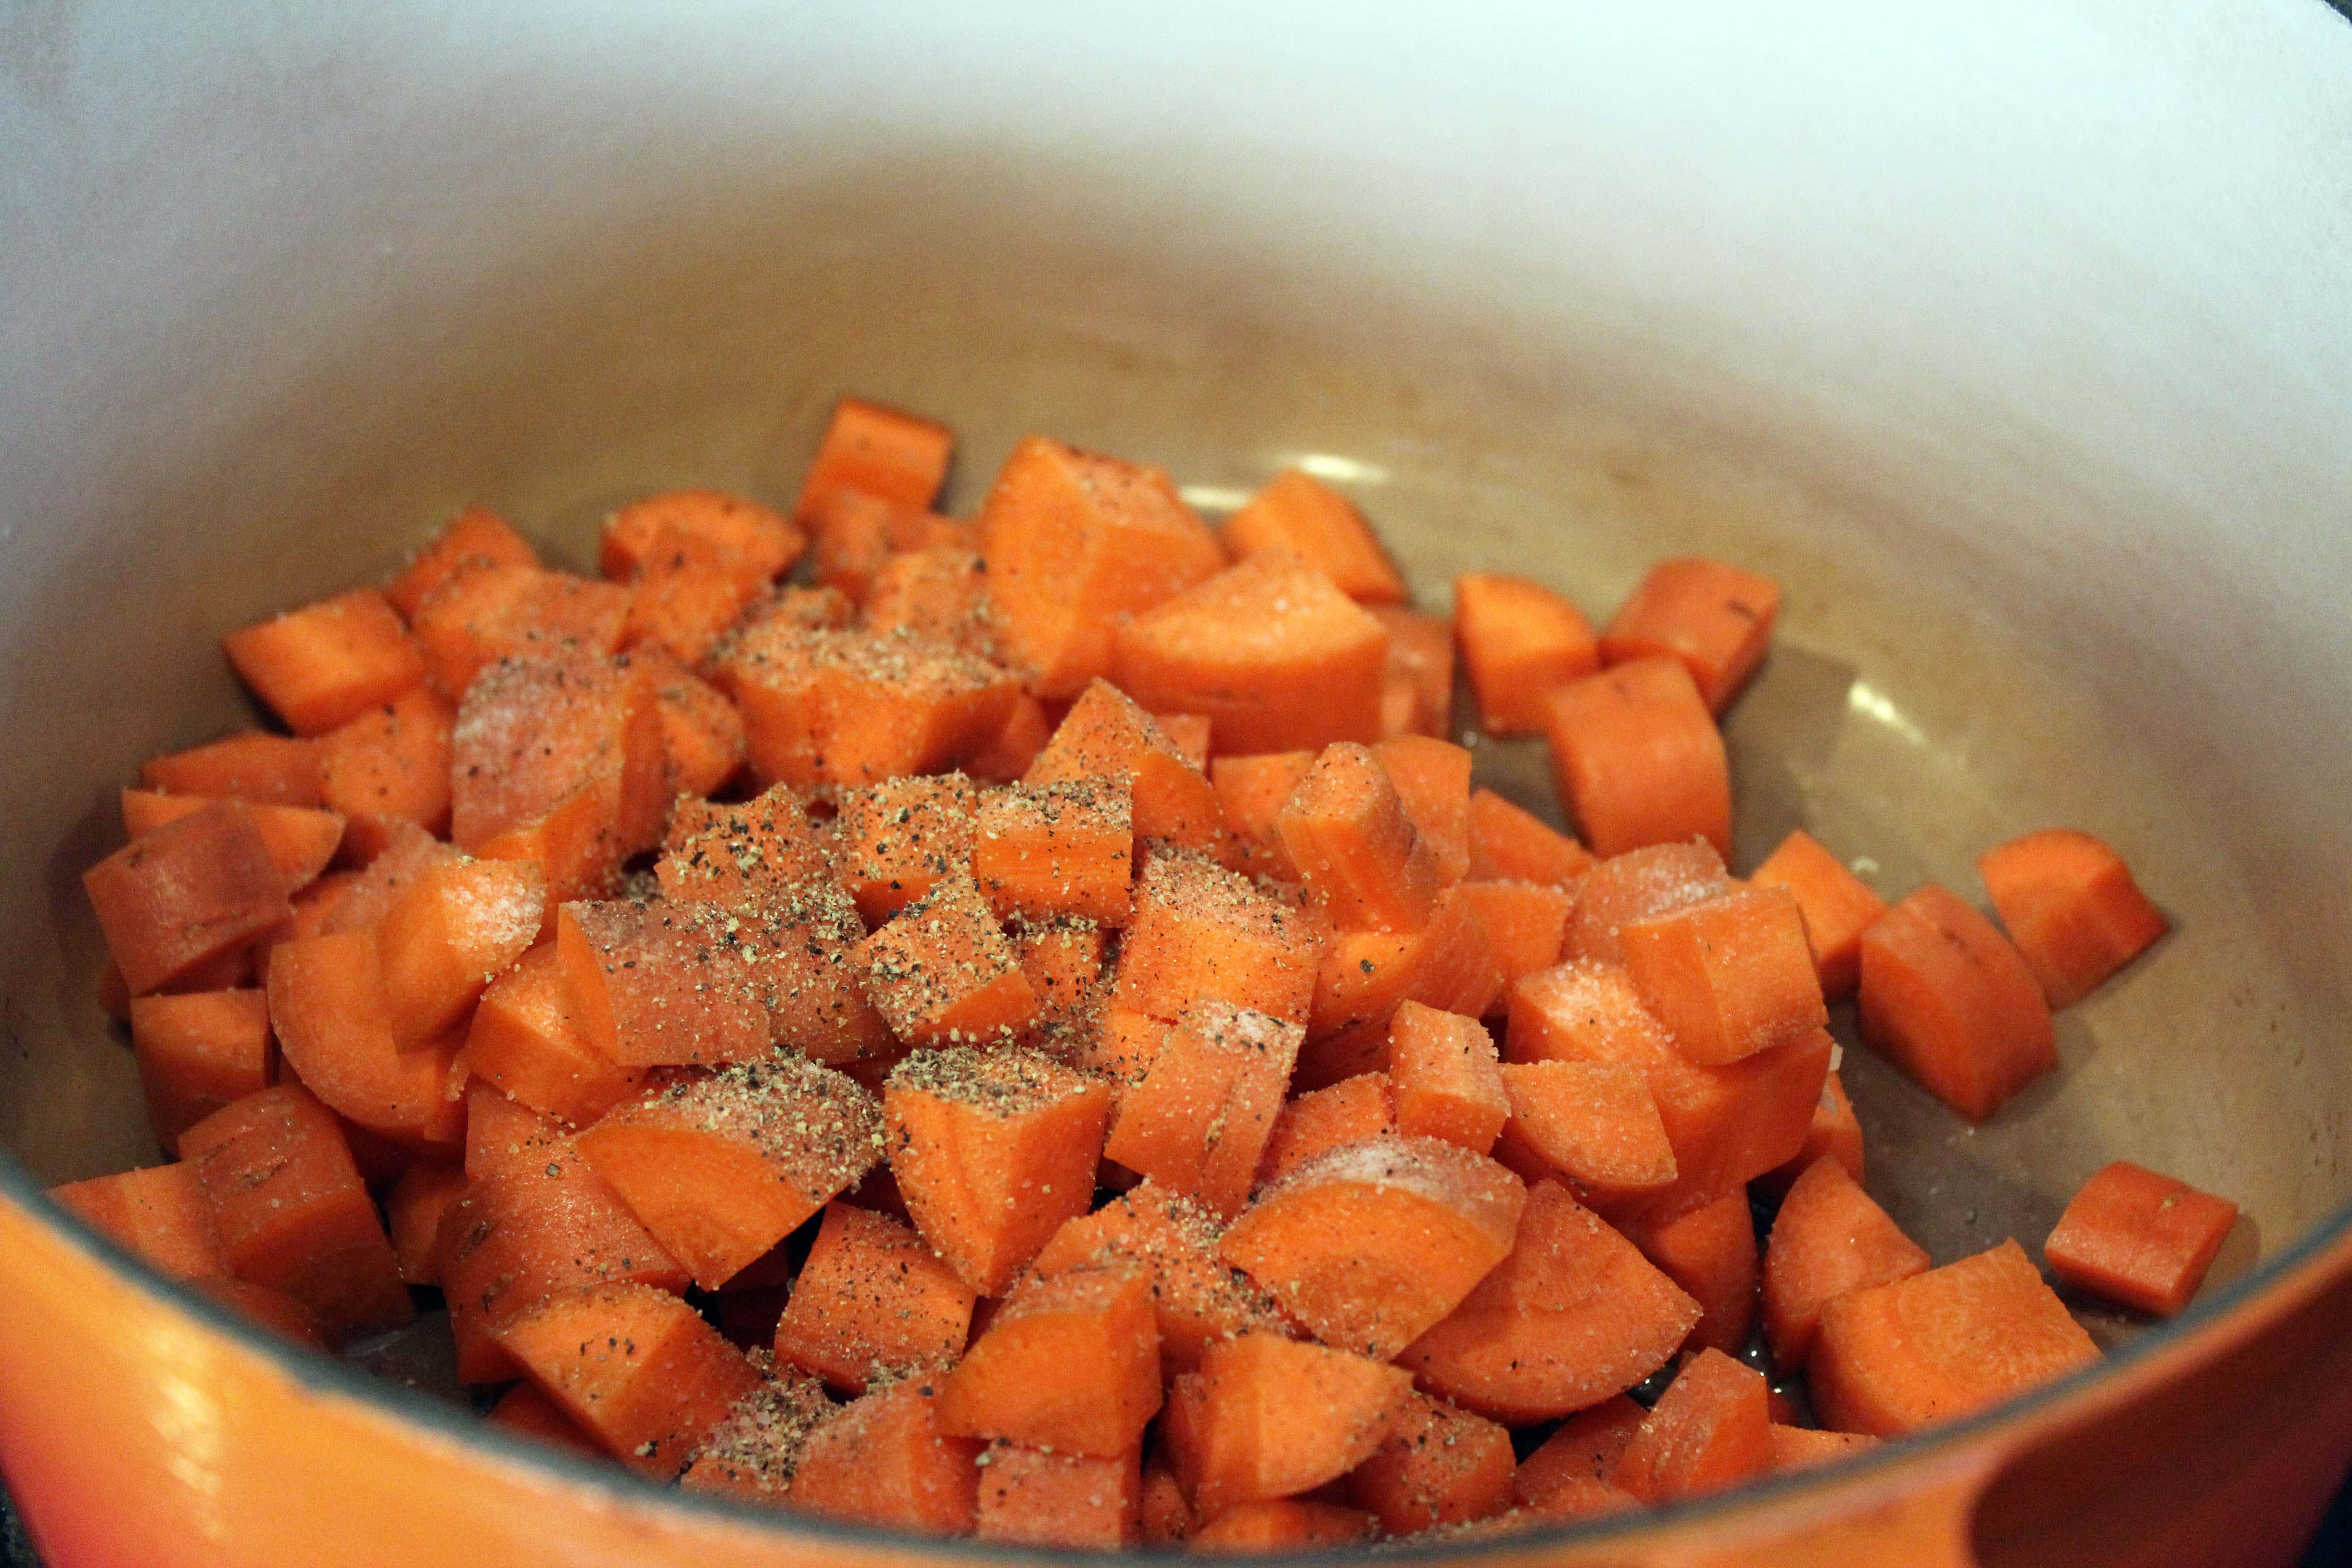 Start carrot with salt and pepper